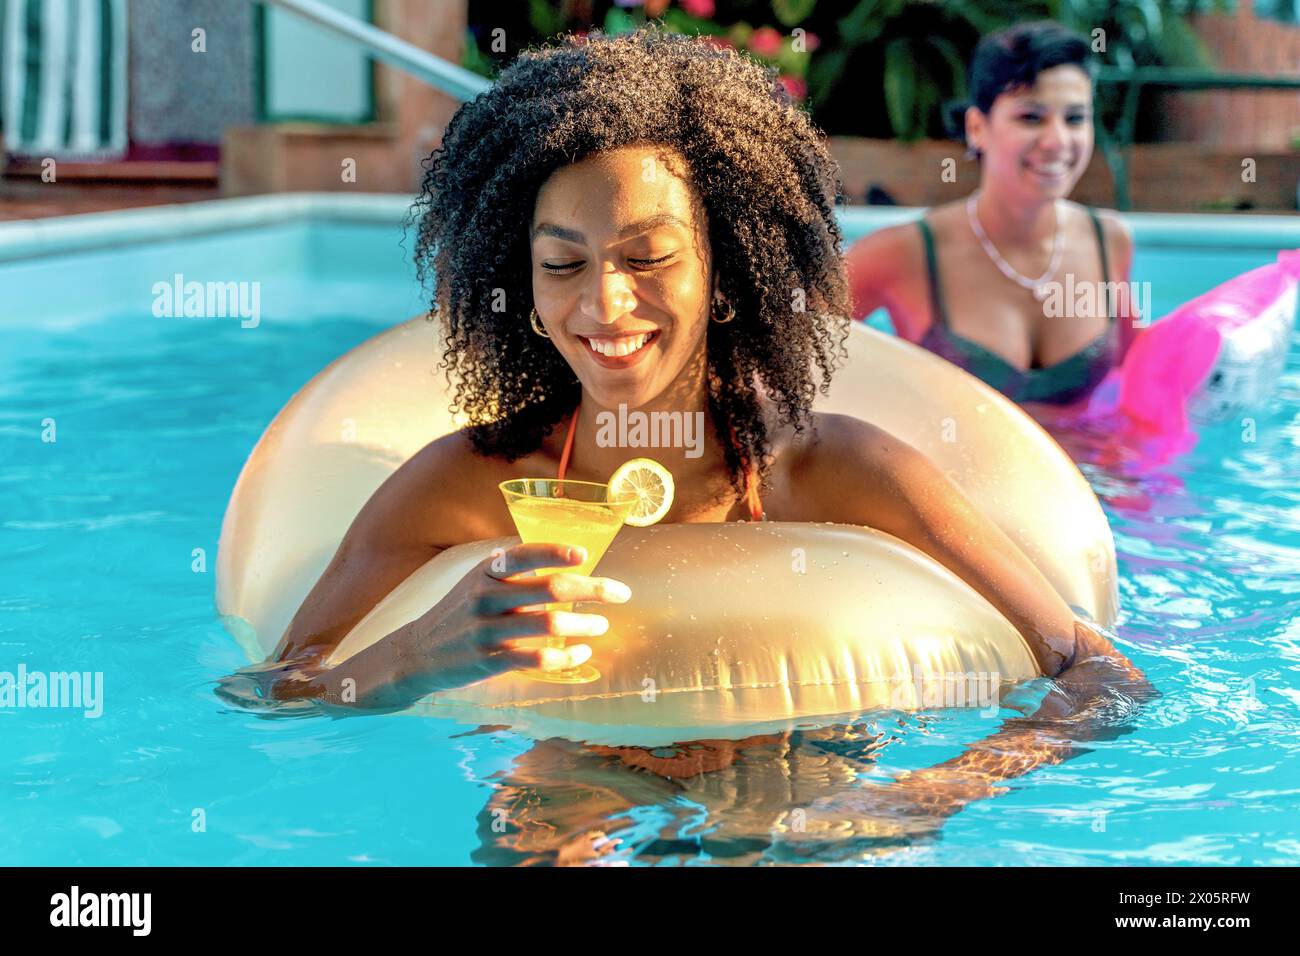 African descent woman with a bright smile relaxes on a golden inflatable ring in a pool, sipping a refreshing lemon cocktail on a sunlit day, with a f Stock Photo